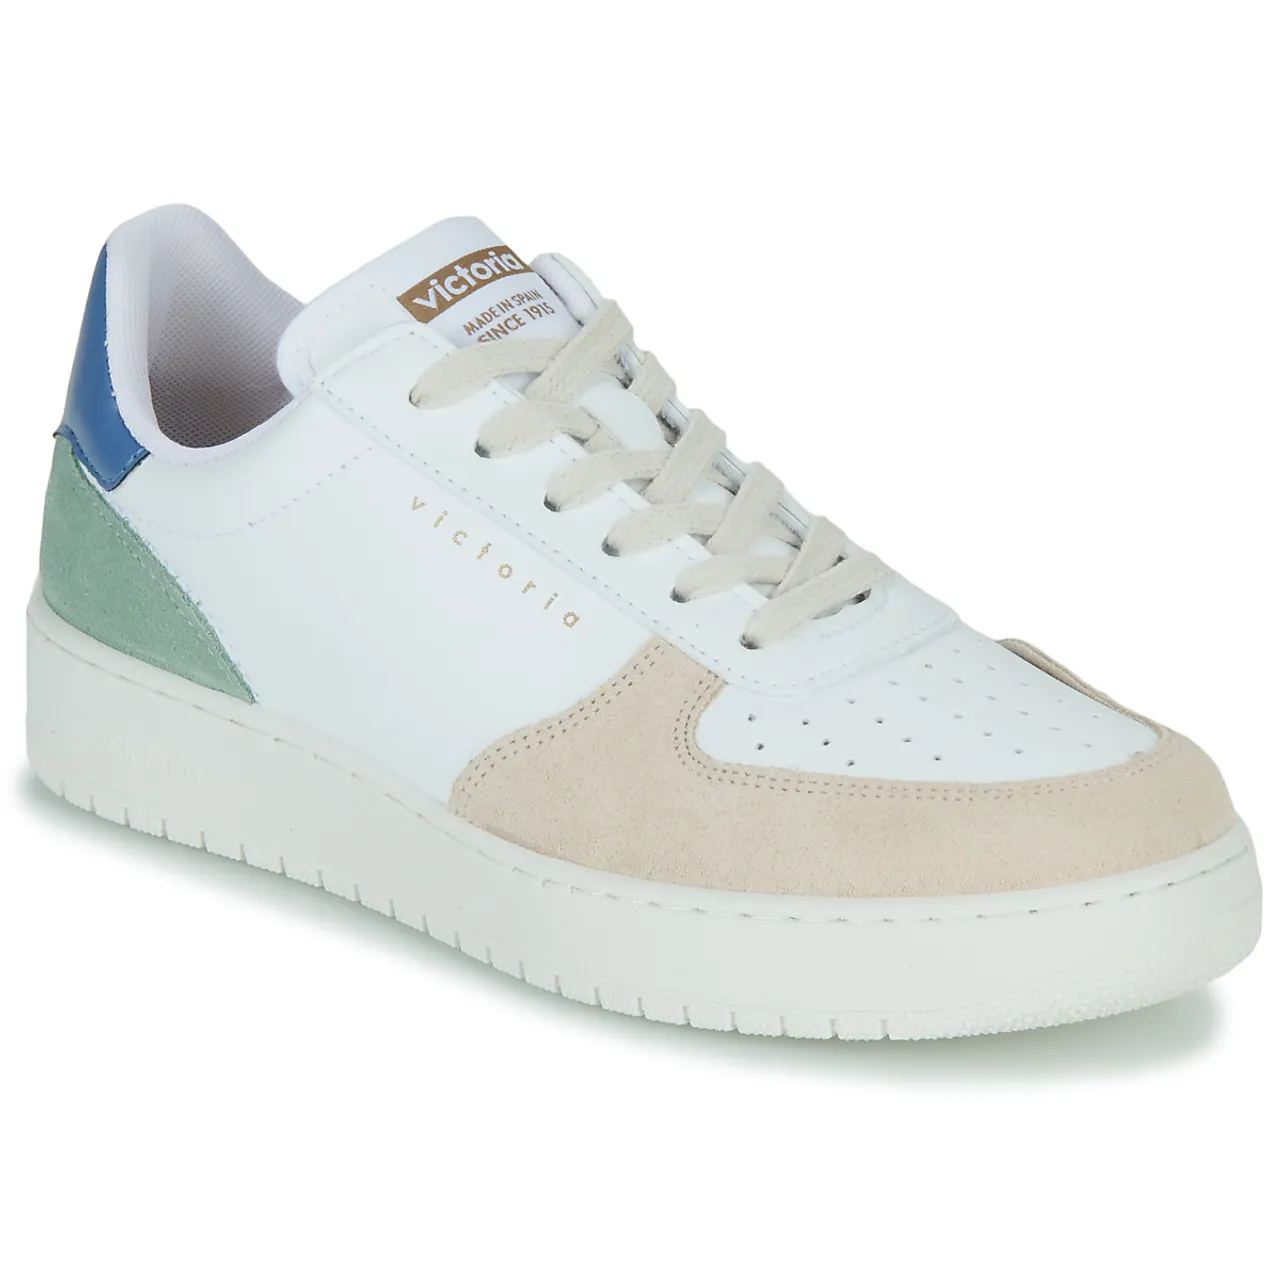 Victoria  MADRID EFECTO PIEL   LOG  women's Shoes (Trainers) in White